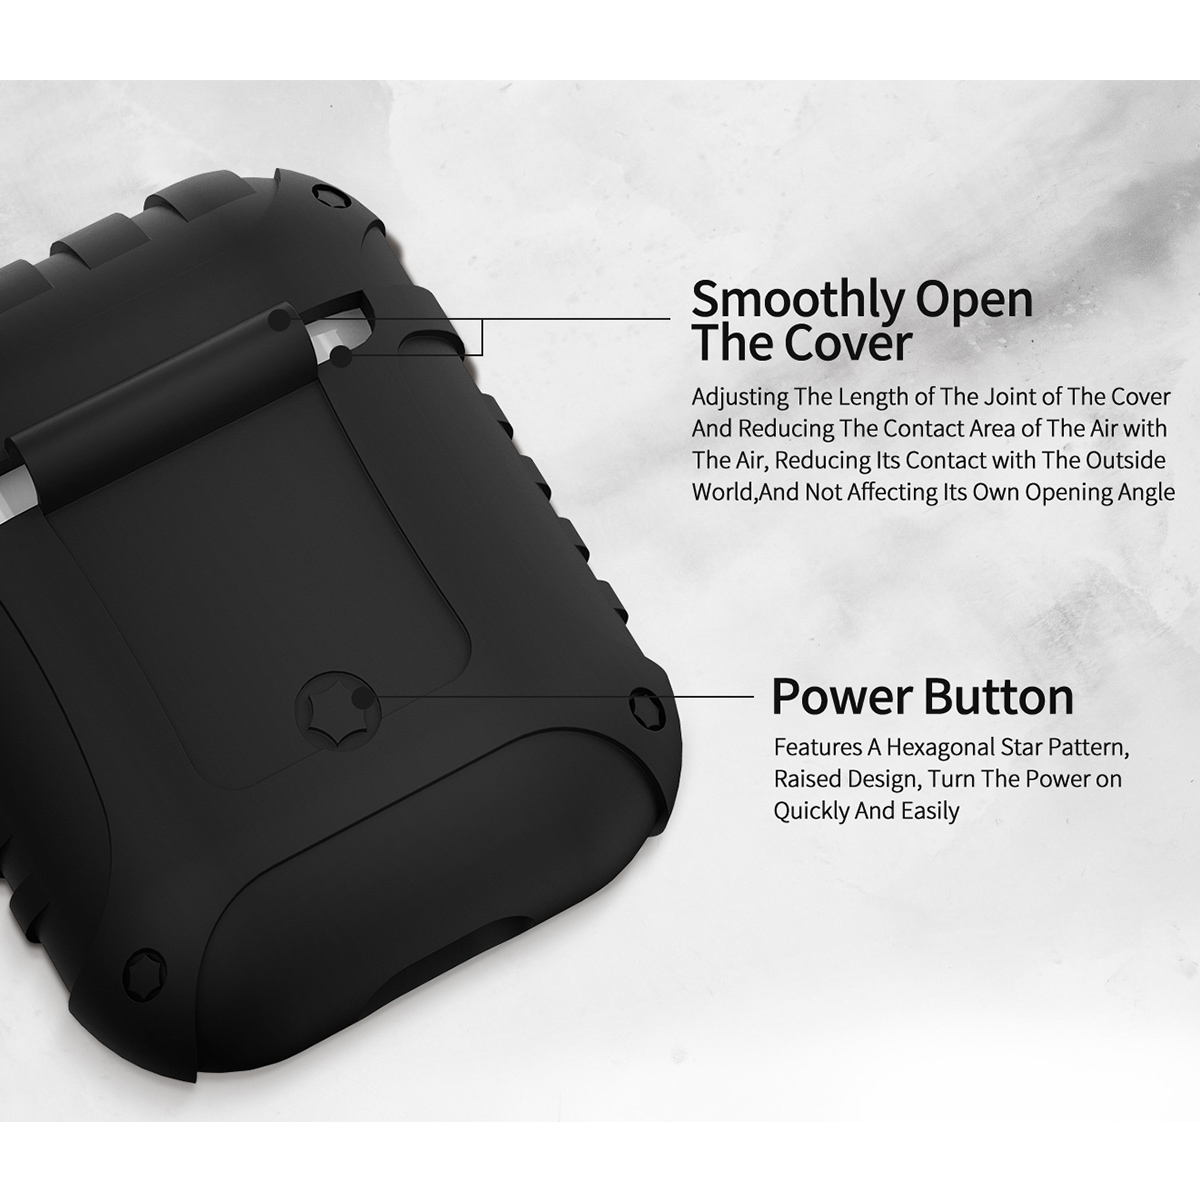 Pure-Armor-Design-Soft-Silicone-Shockproof-Earphone-Storage-Case-Cover-with-Keychain-for-Apple-Airpo-1790438-5